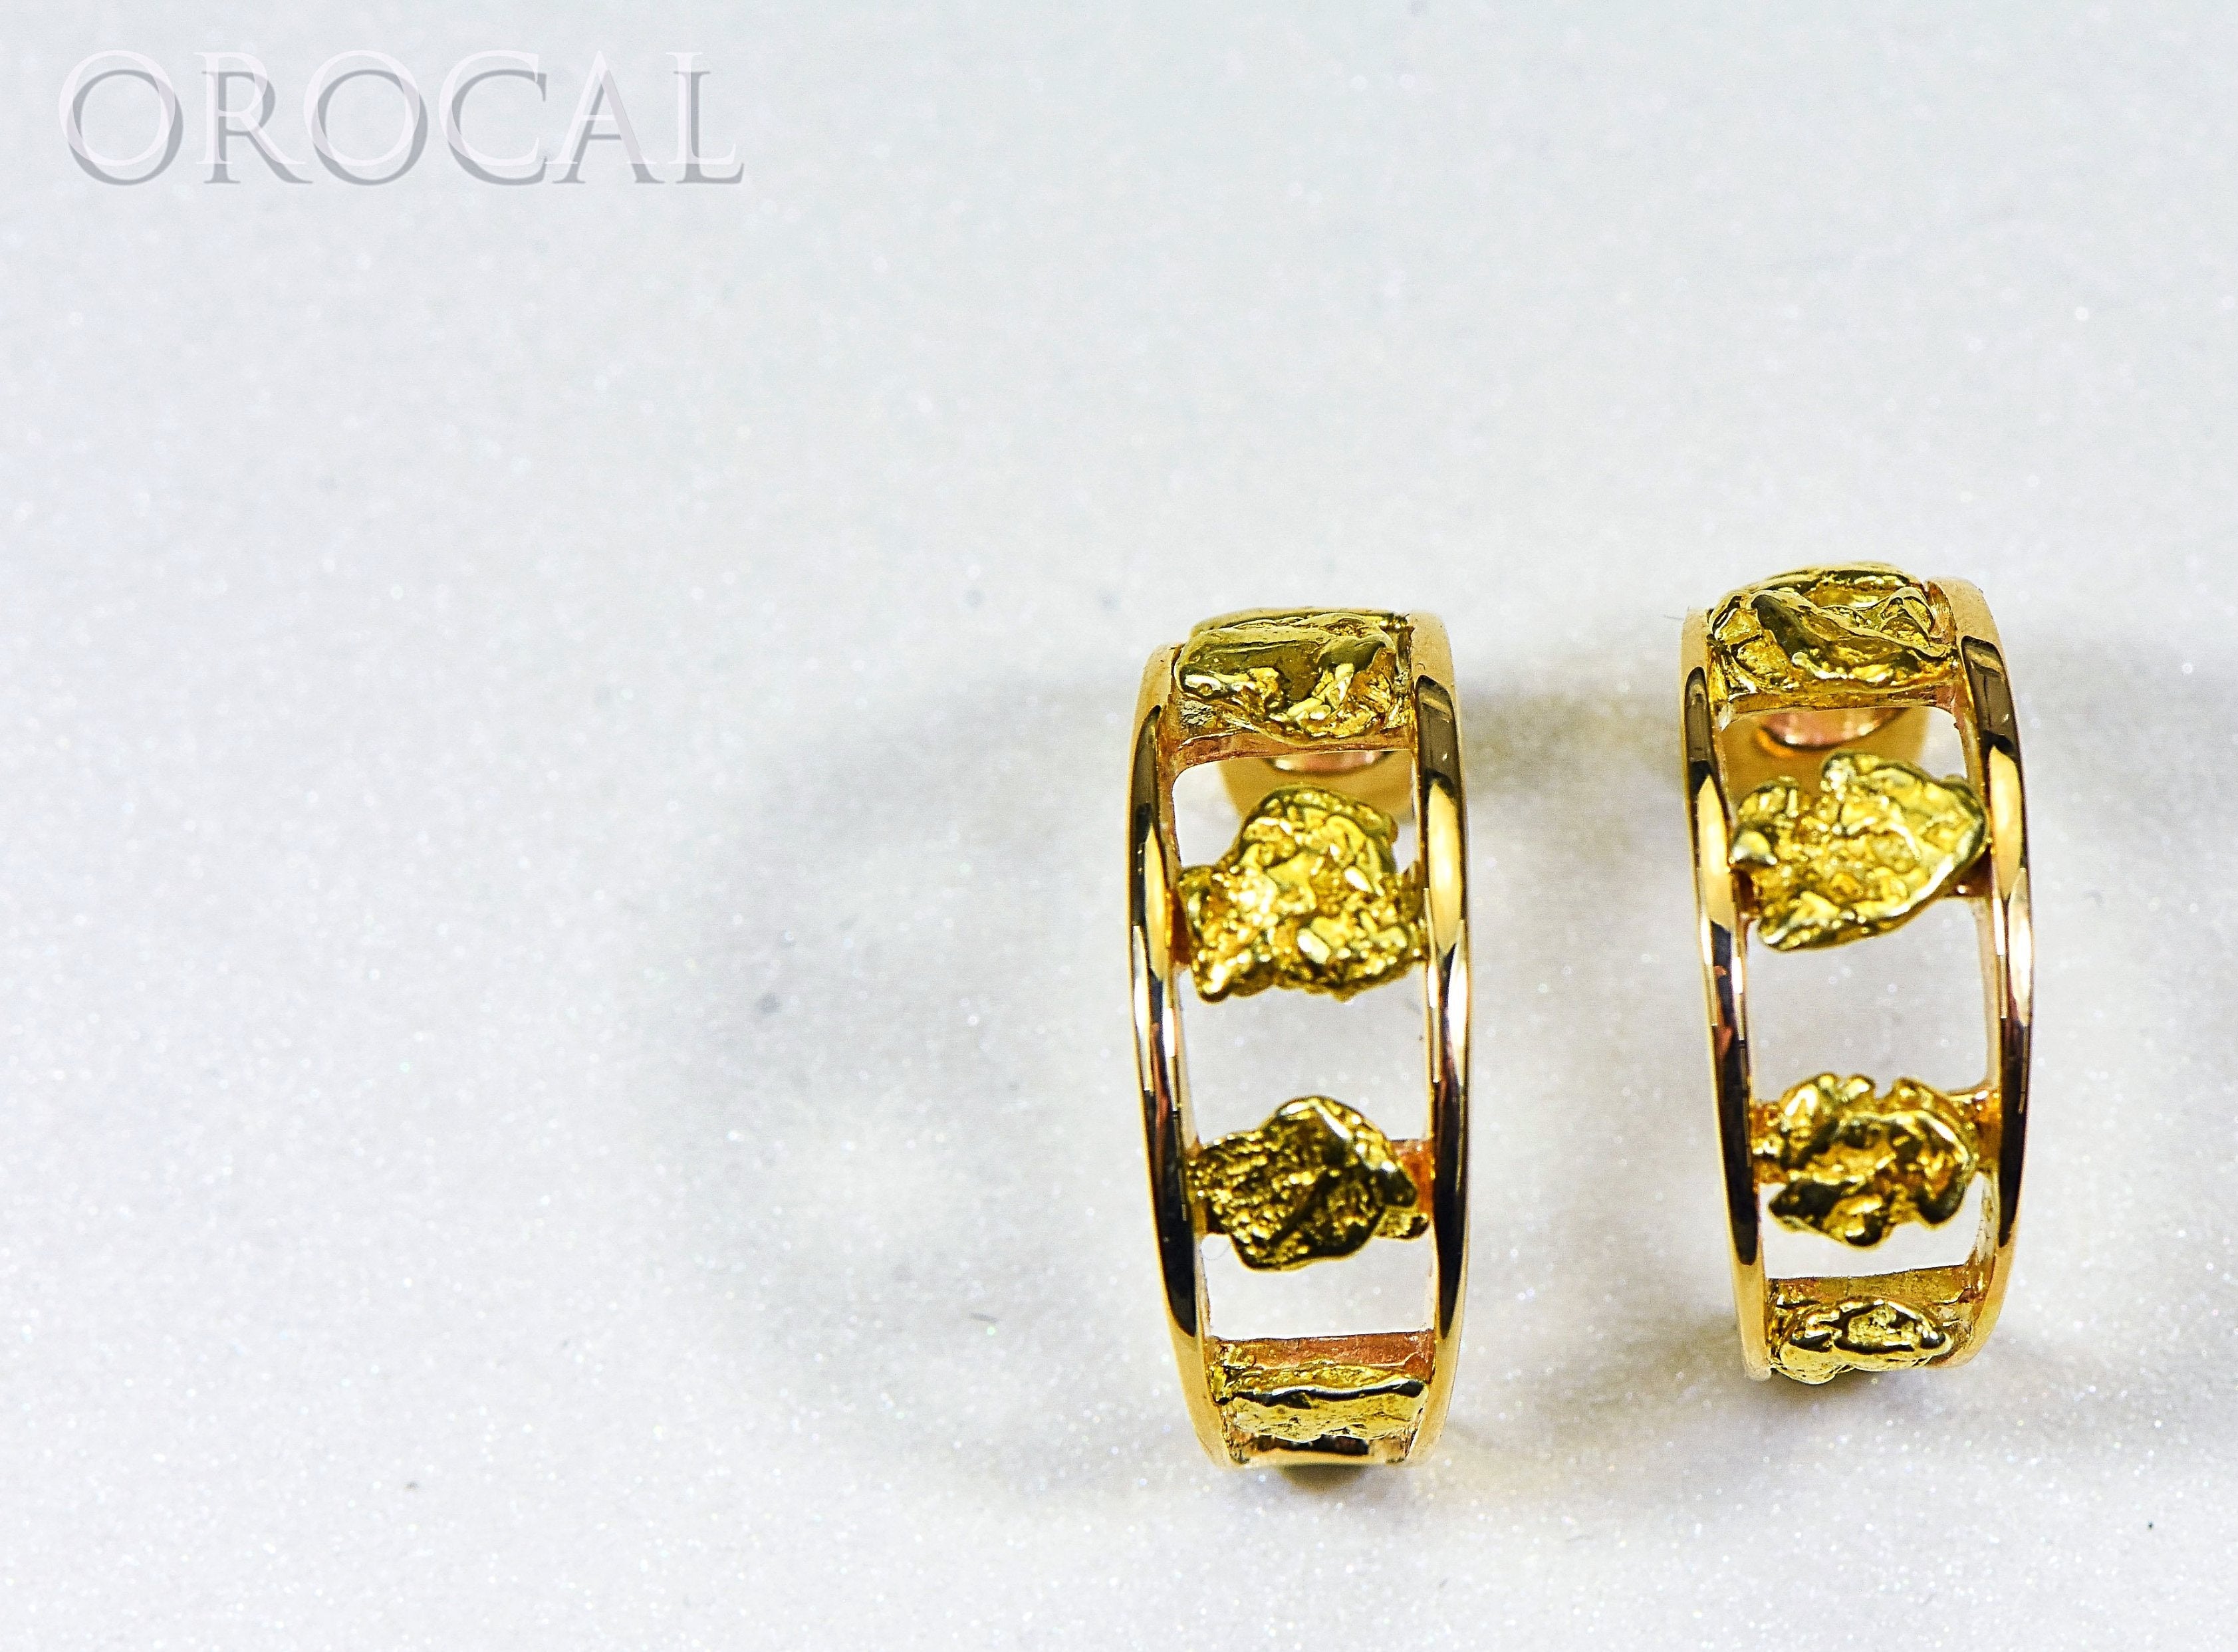 Gold Nugget Earrings "Orocal" EH19 Genuine Hand Crafted Jewelry - 14K Gold Casting